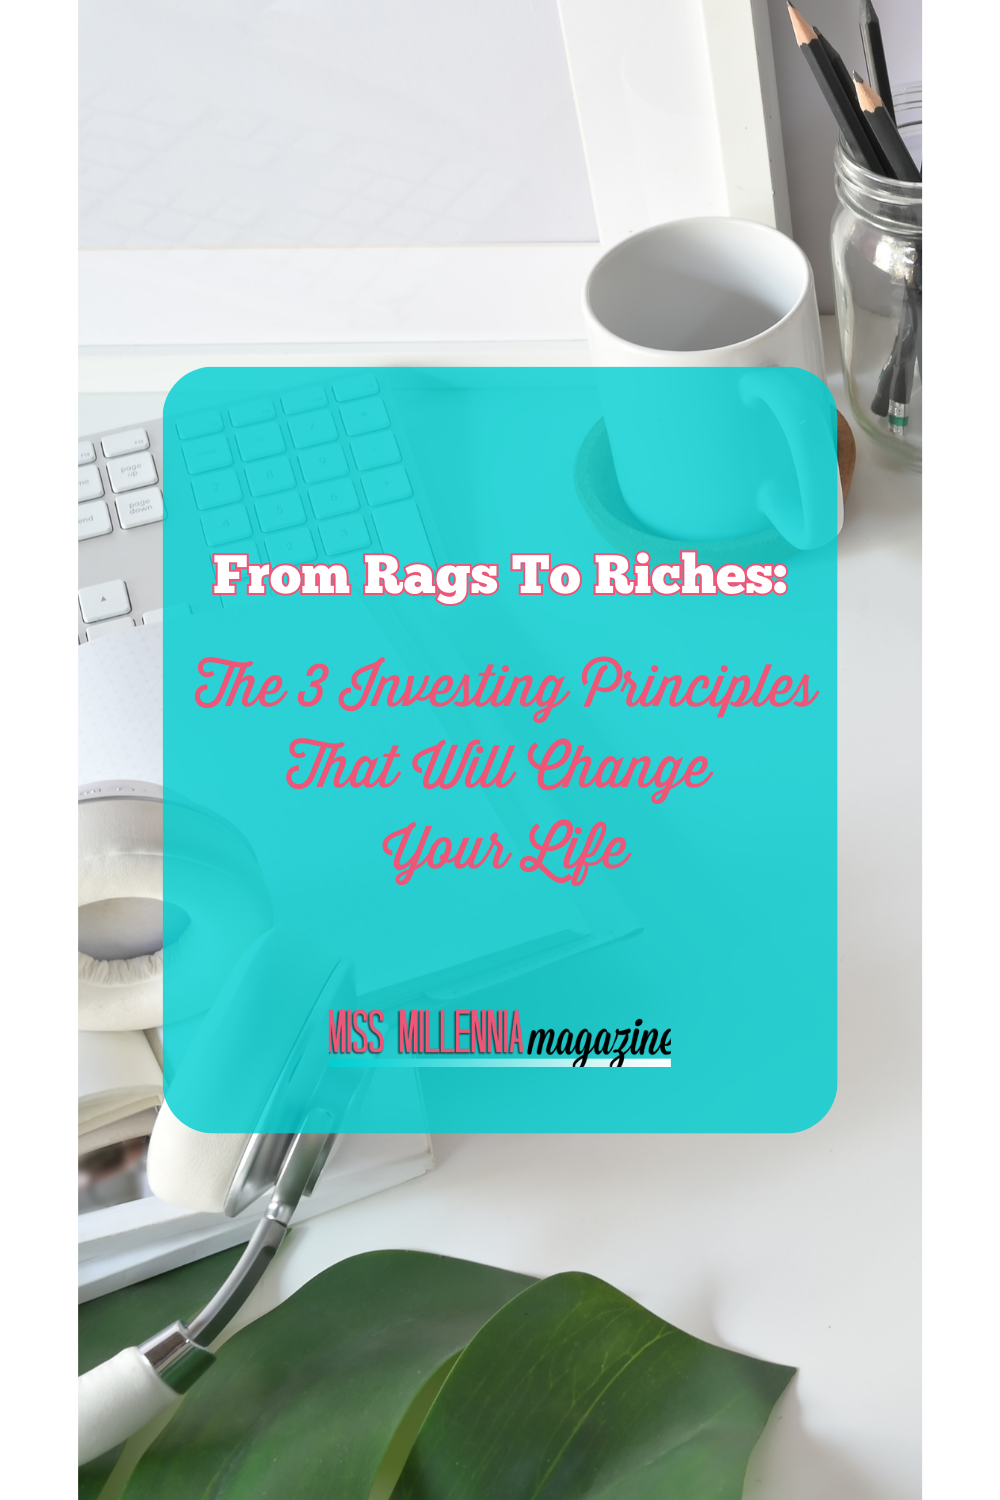 From Rags To Riches: The 3 Investing Principles That Will Change Your Life